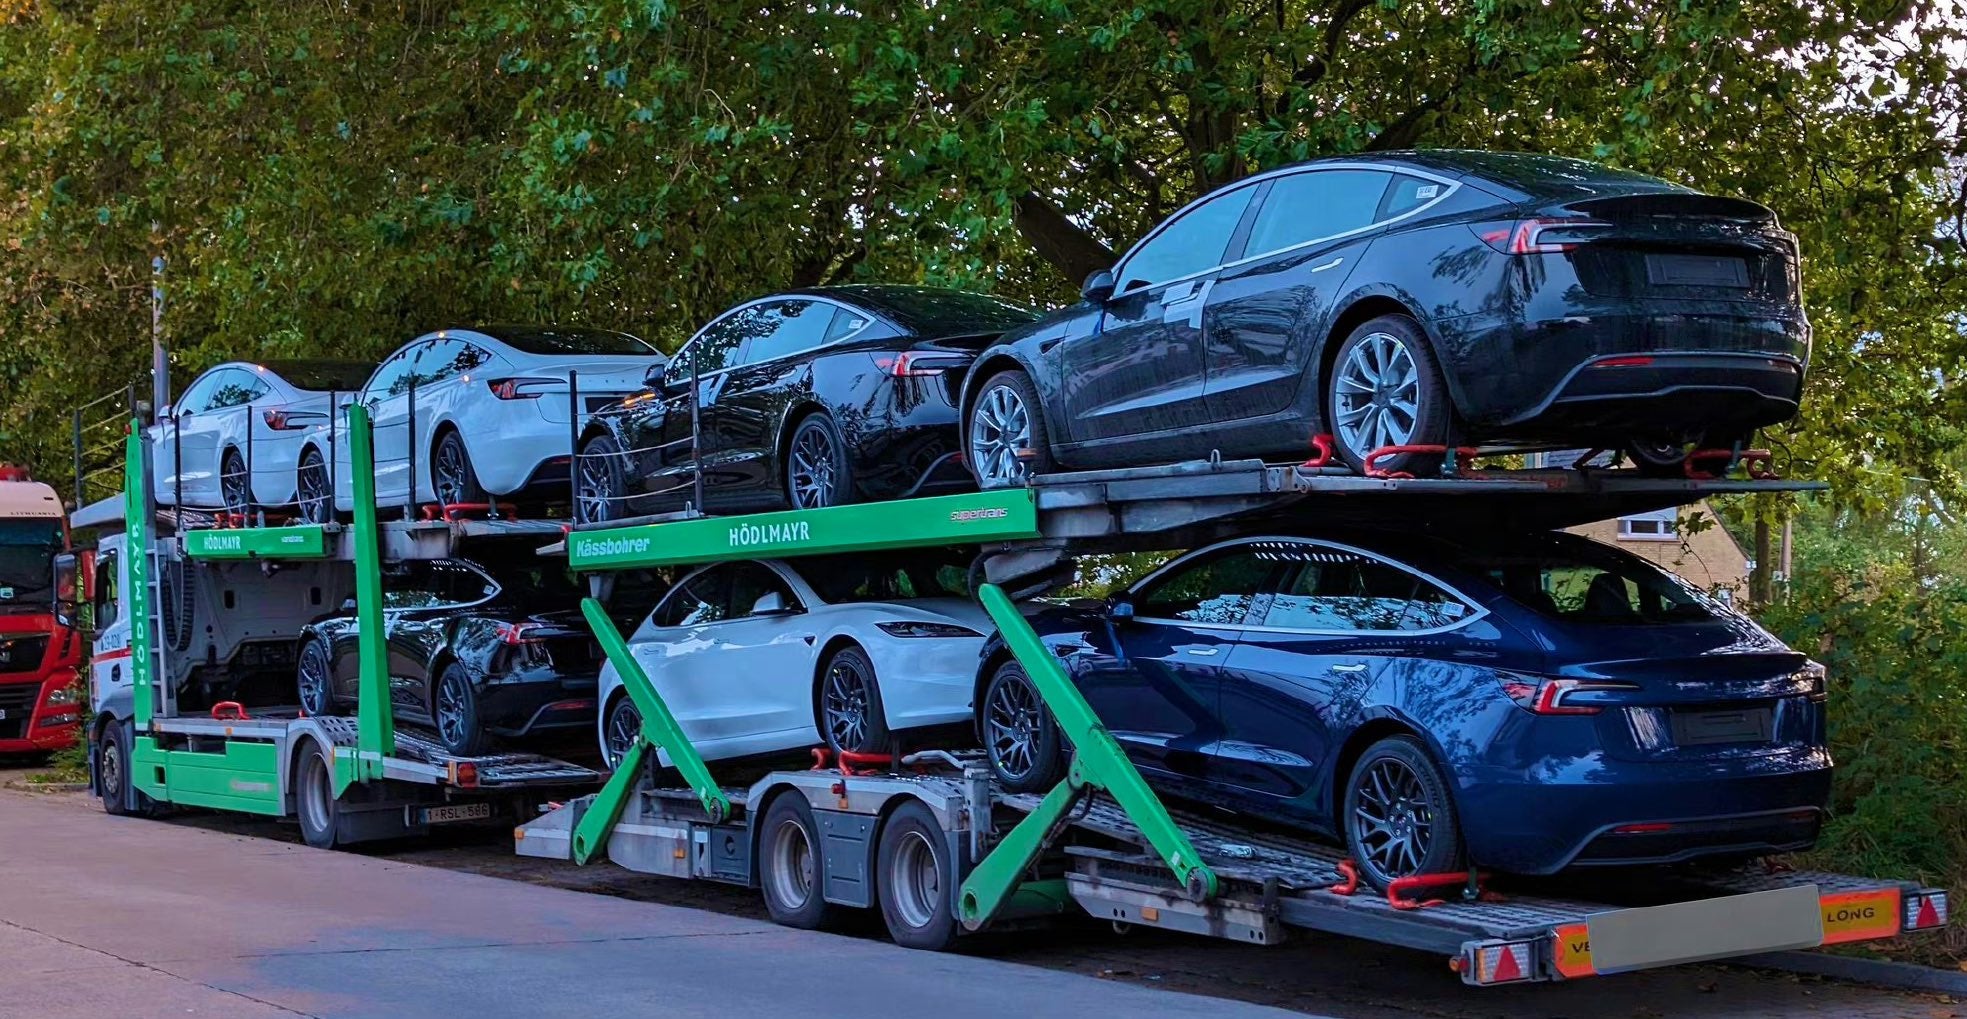 Tesla Model 3 Highland delivery from Fremont expected to start in